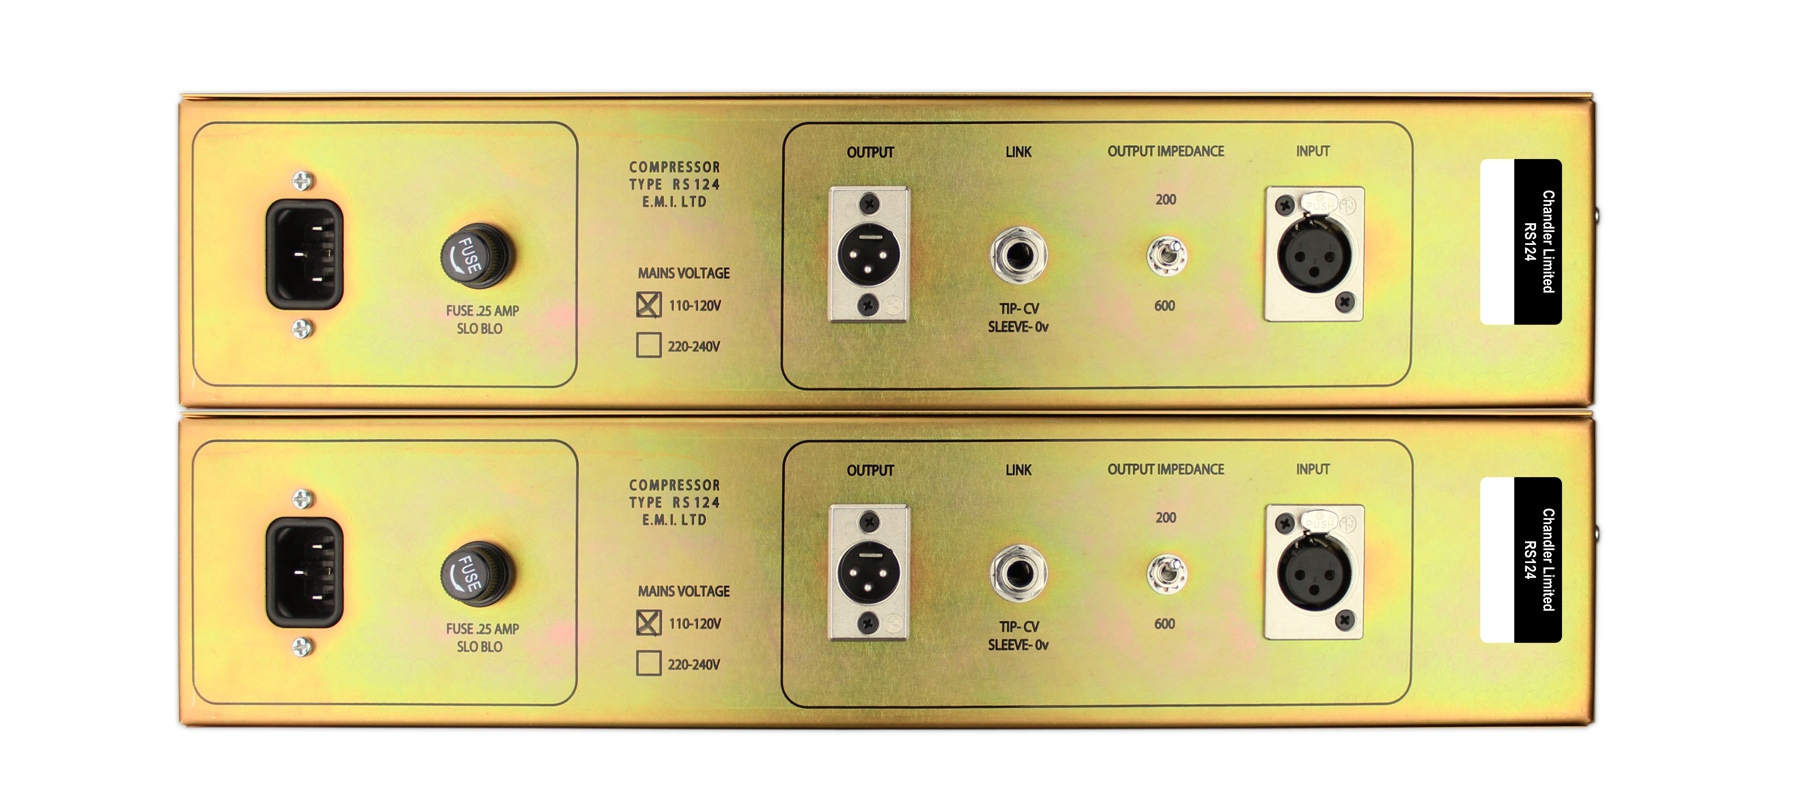 RS124 Mastering Matched Pair (Stepped I/O)背面画像